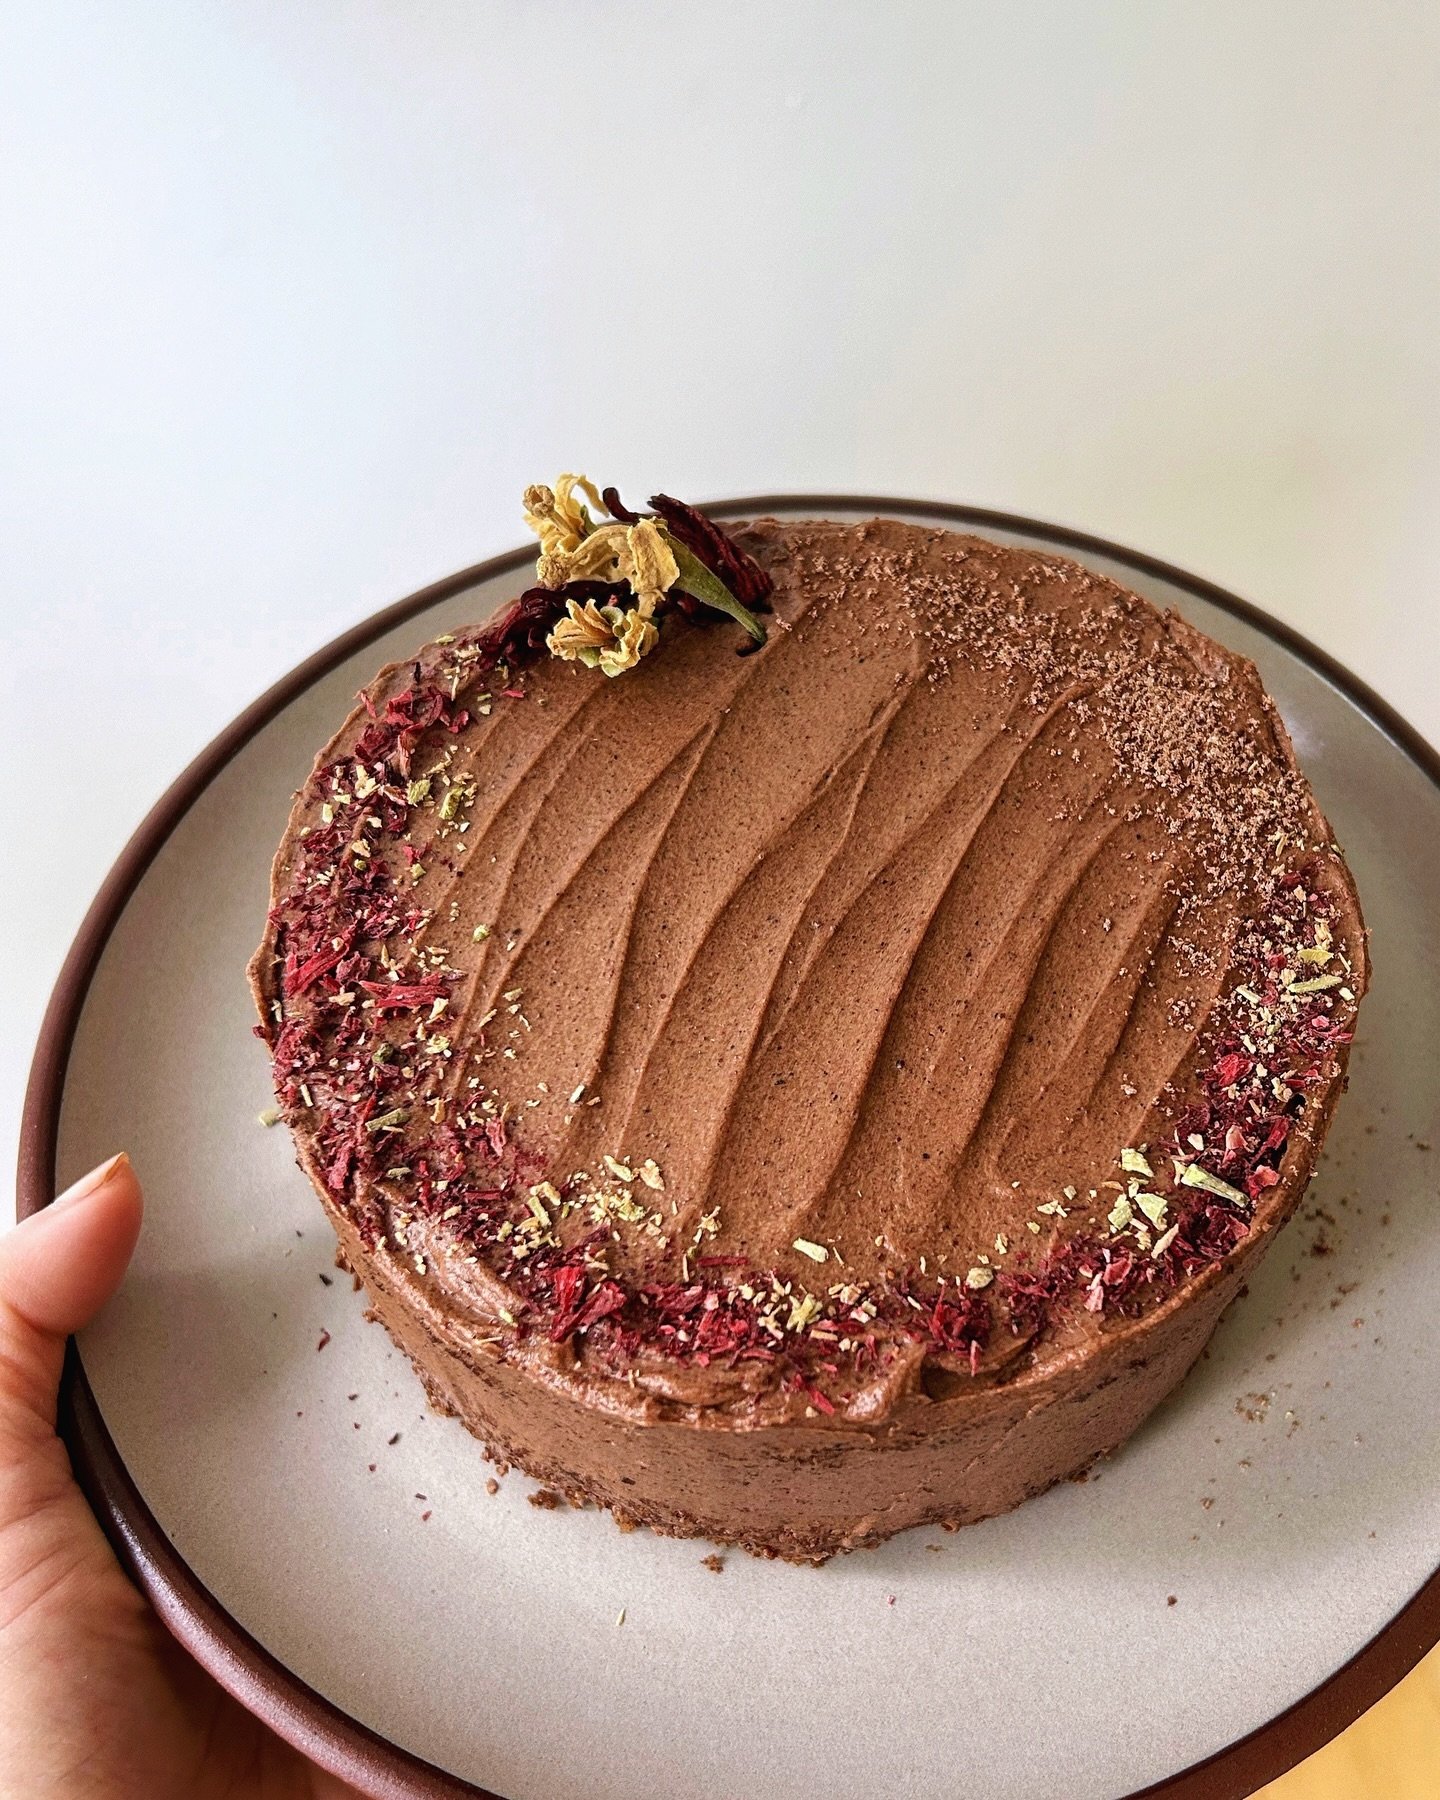 making this @bonappetitmag gf chocolate fudge cake for absolutely no reason except to eat it, got me in touch with my pastry days in montreal 👩🏻&zwj;🍳

ft. mexican chocolate, vanilla bean paste, dried hibiscus, and cacao flowers 

reminiscent of a